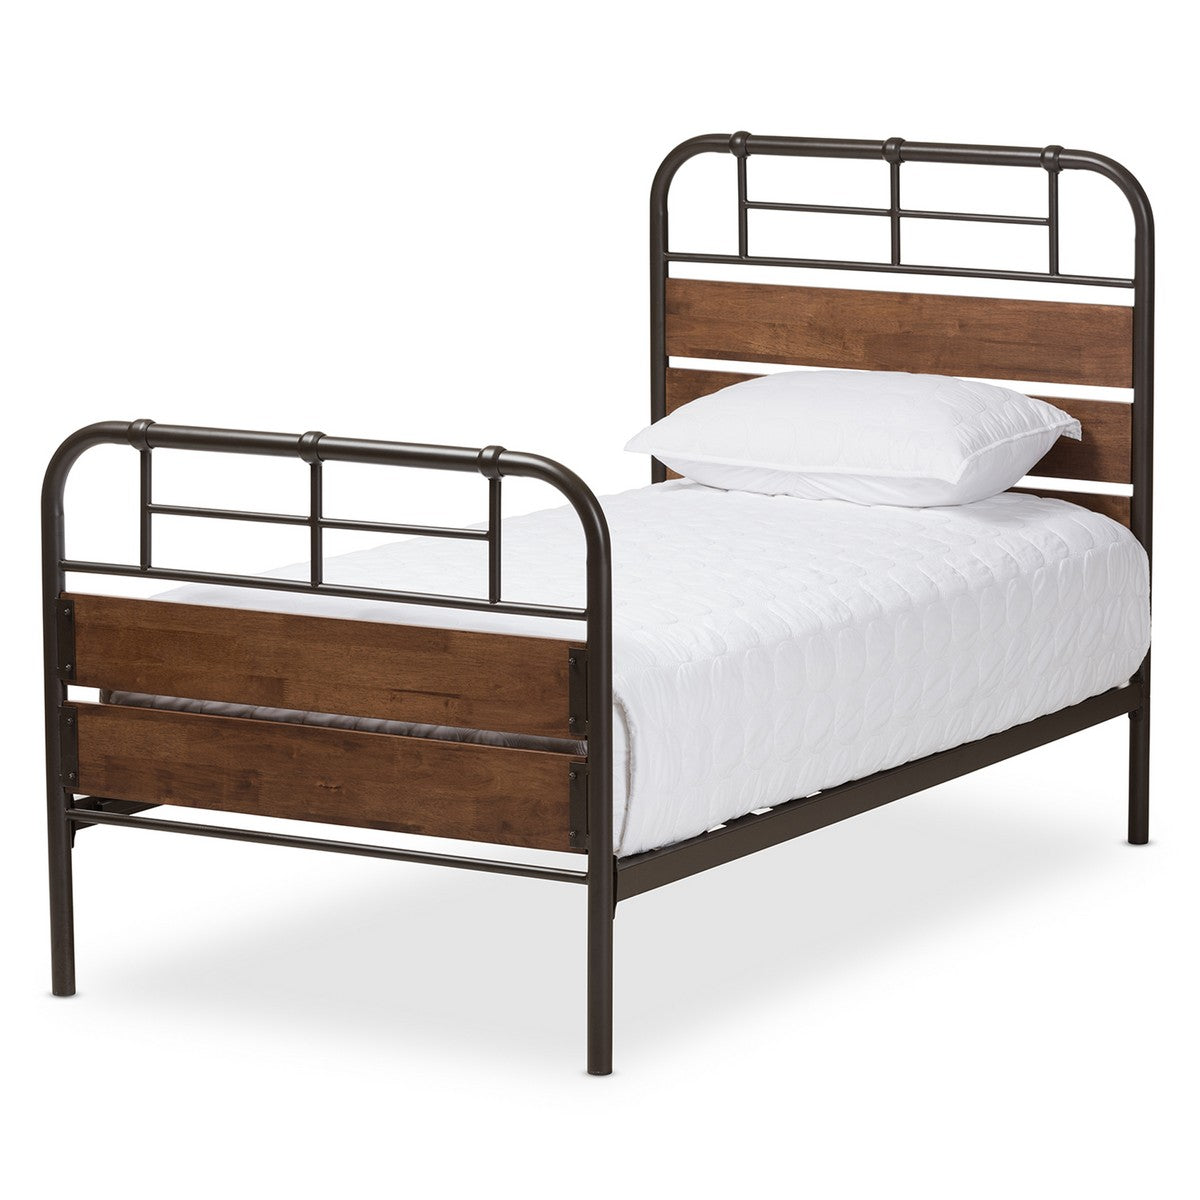 Baxton Studio Monoco Rustic Industrial Black Finished Metal Coco Brown Wood Twin Size Platform Bed Baxton Studio-beds-Minimal And Modern - 1